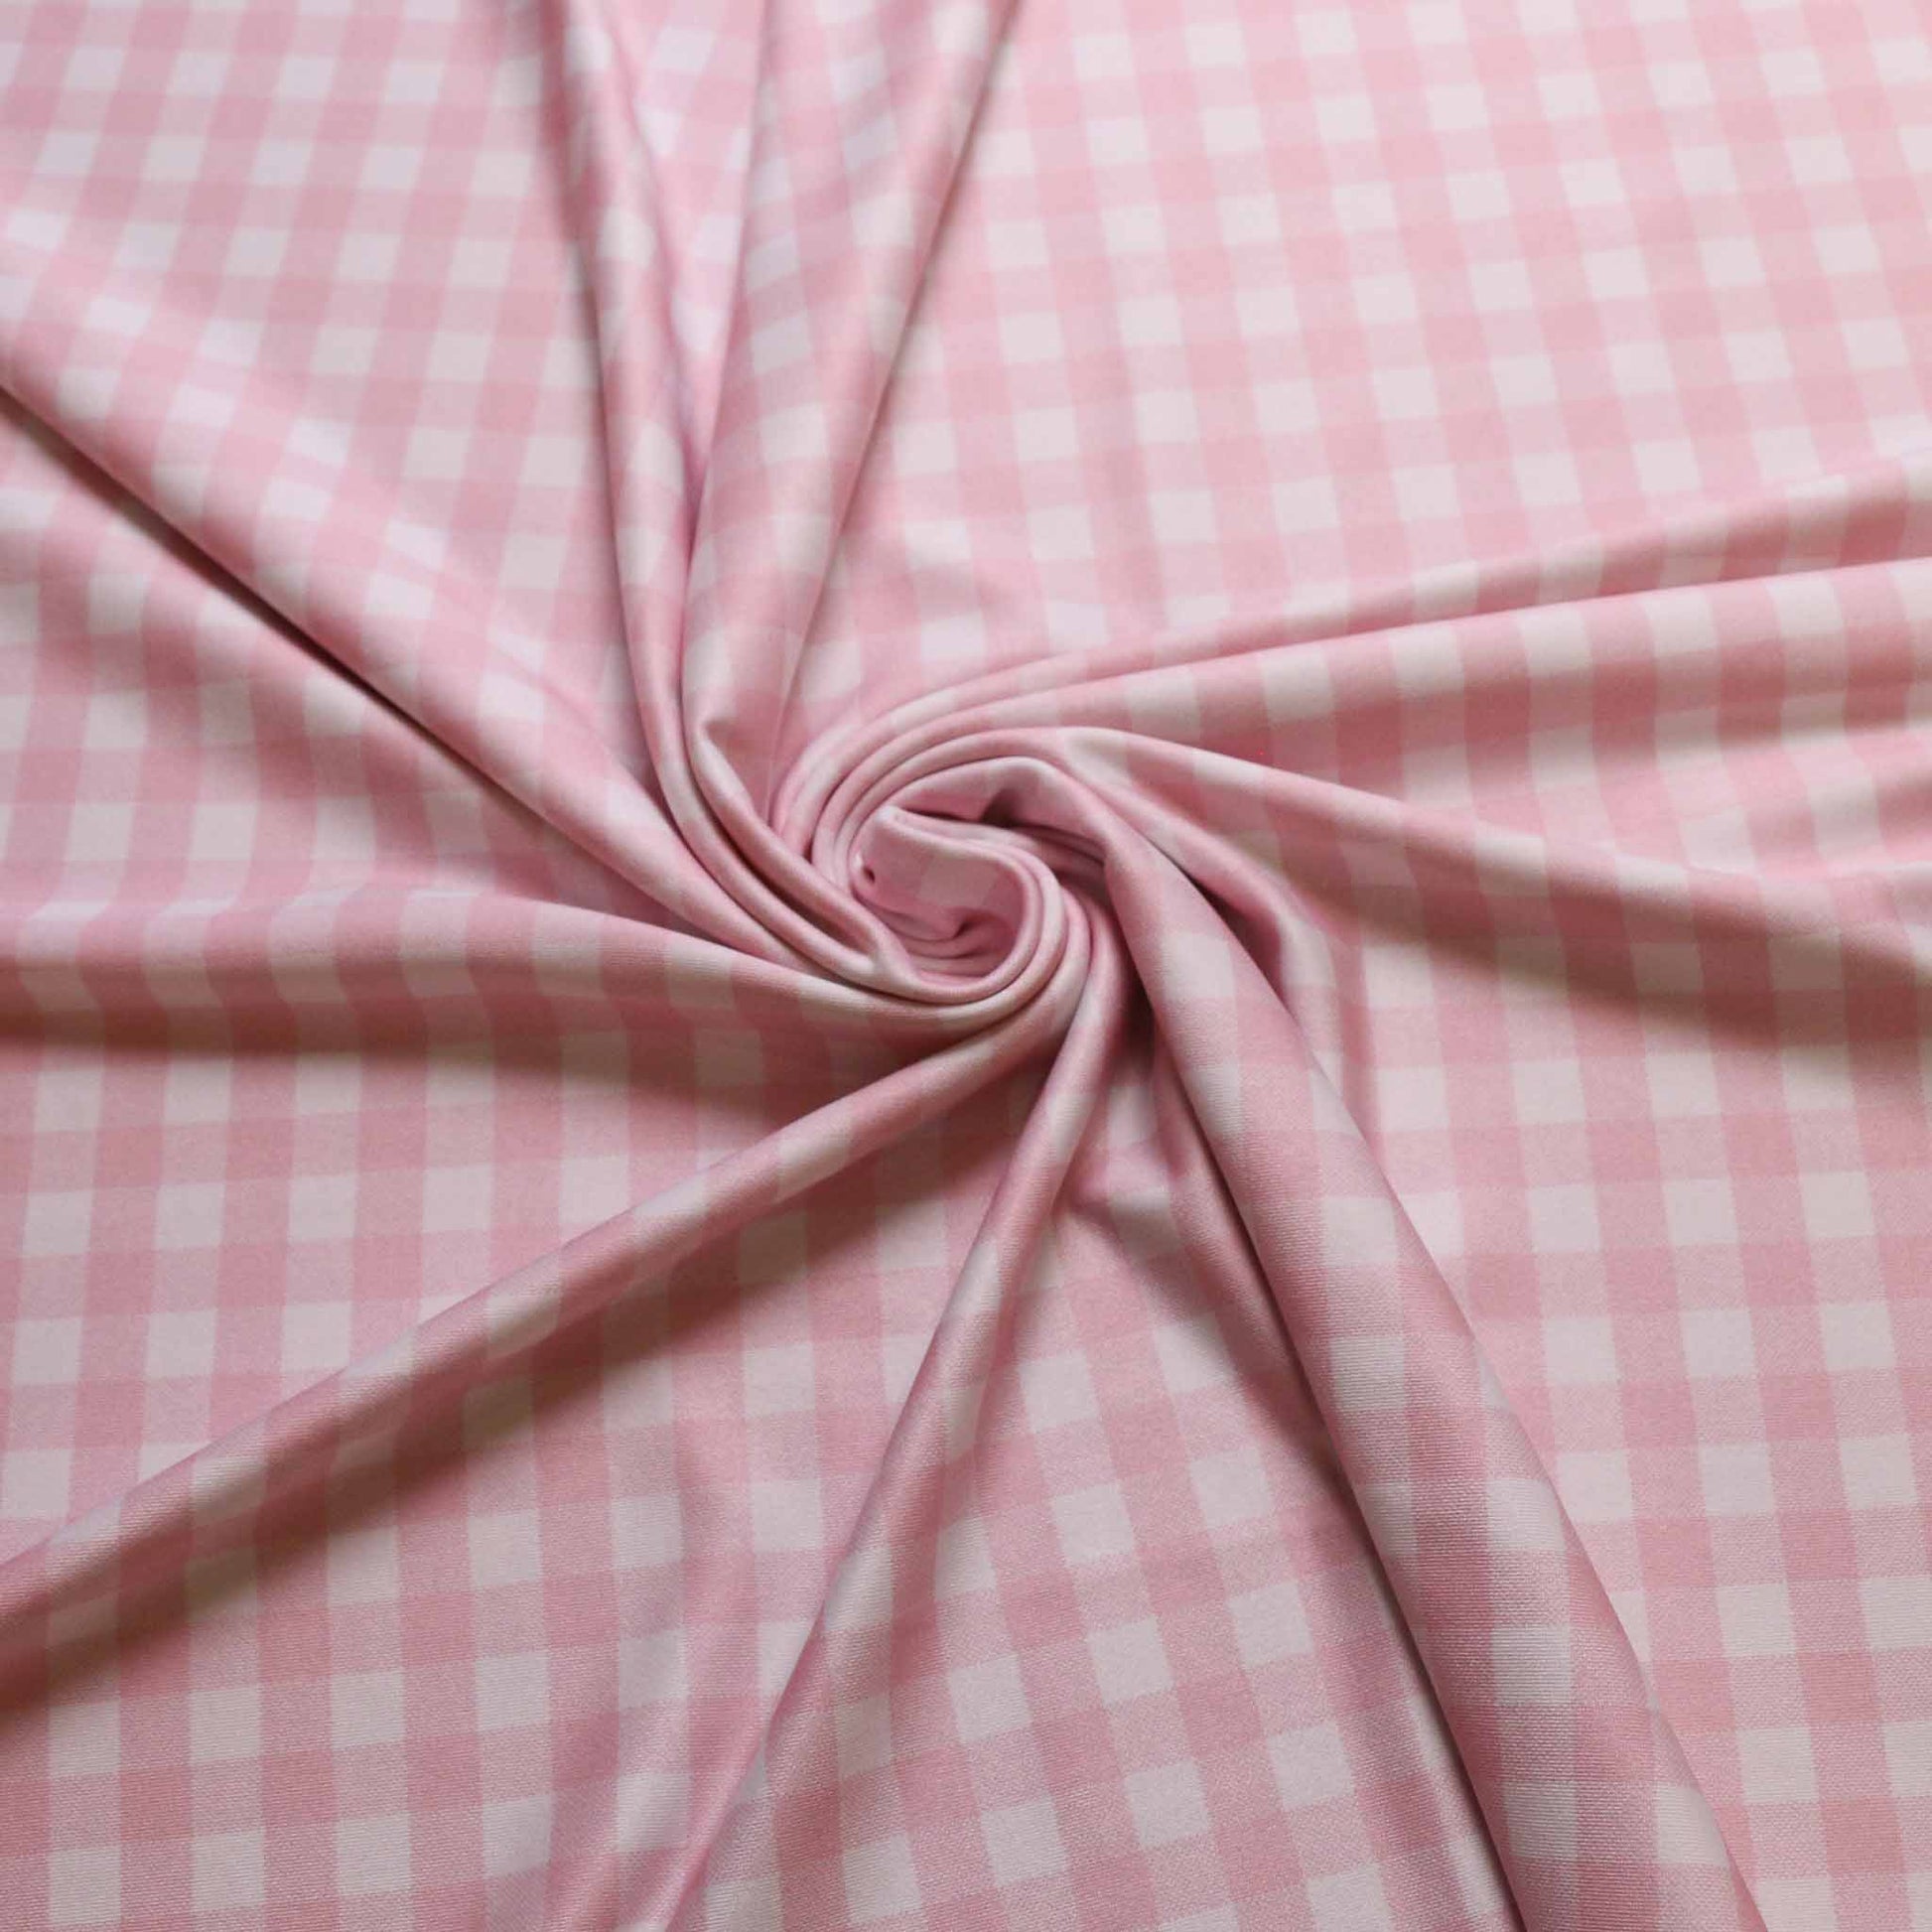 lycra jersey dressmaking fabric with pink and white gingham design